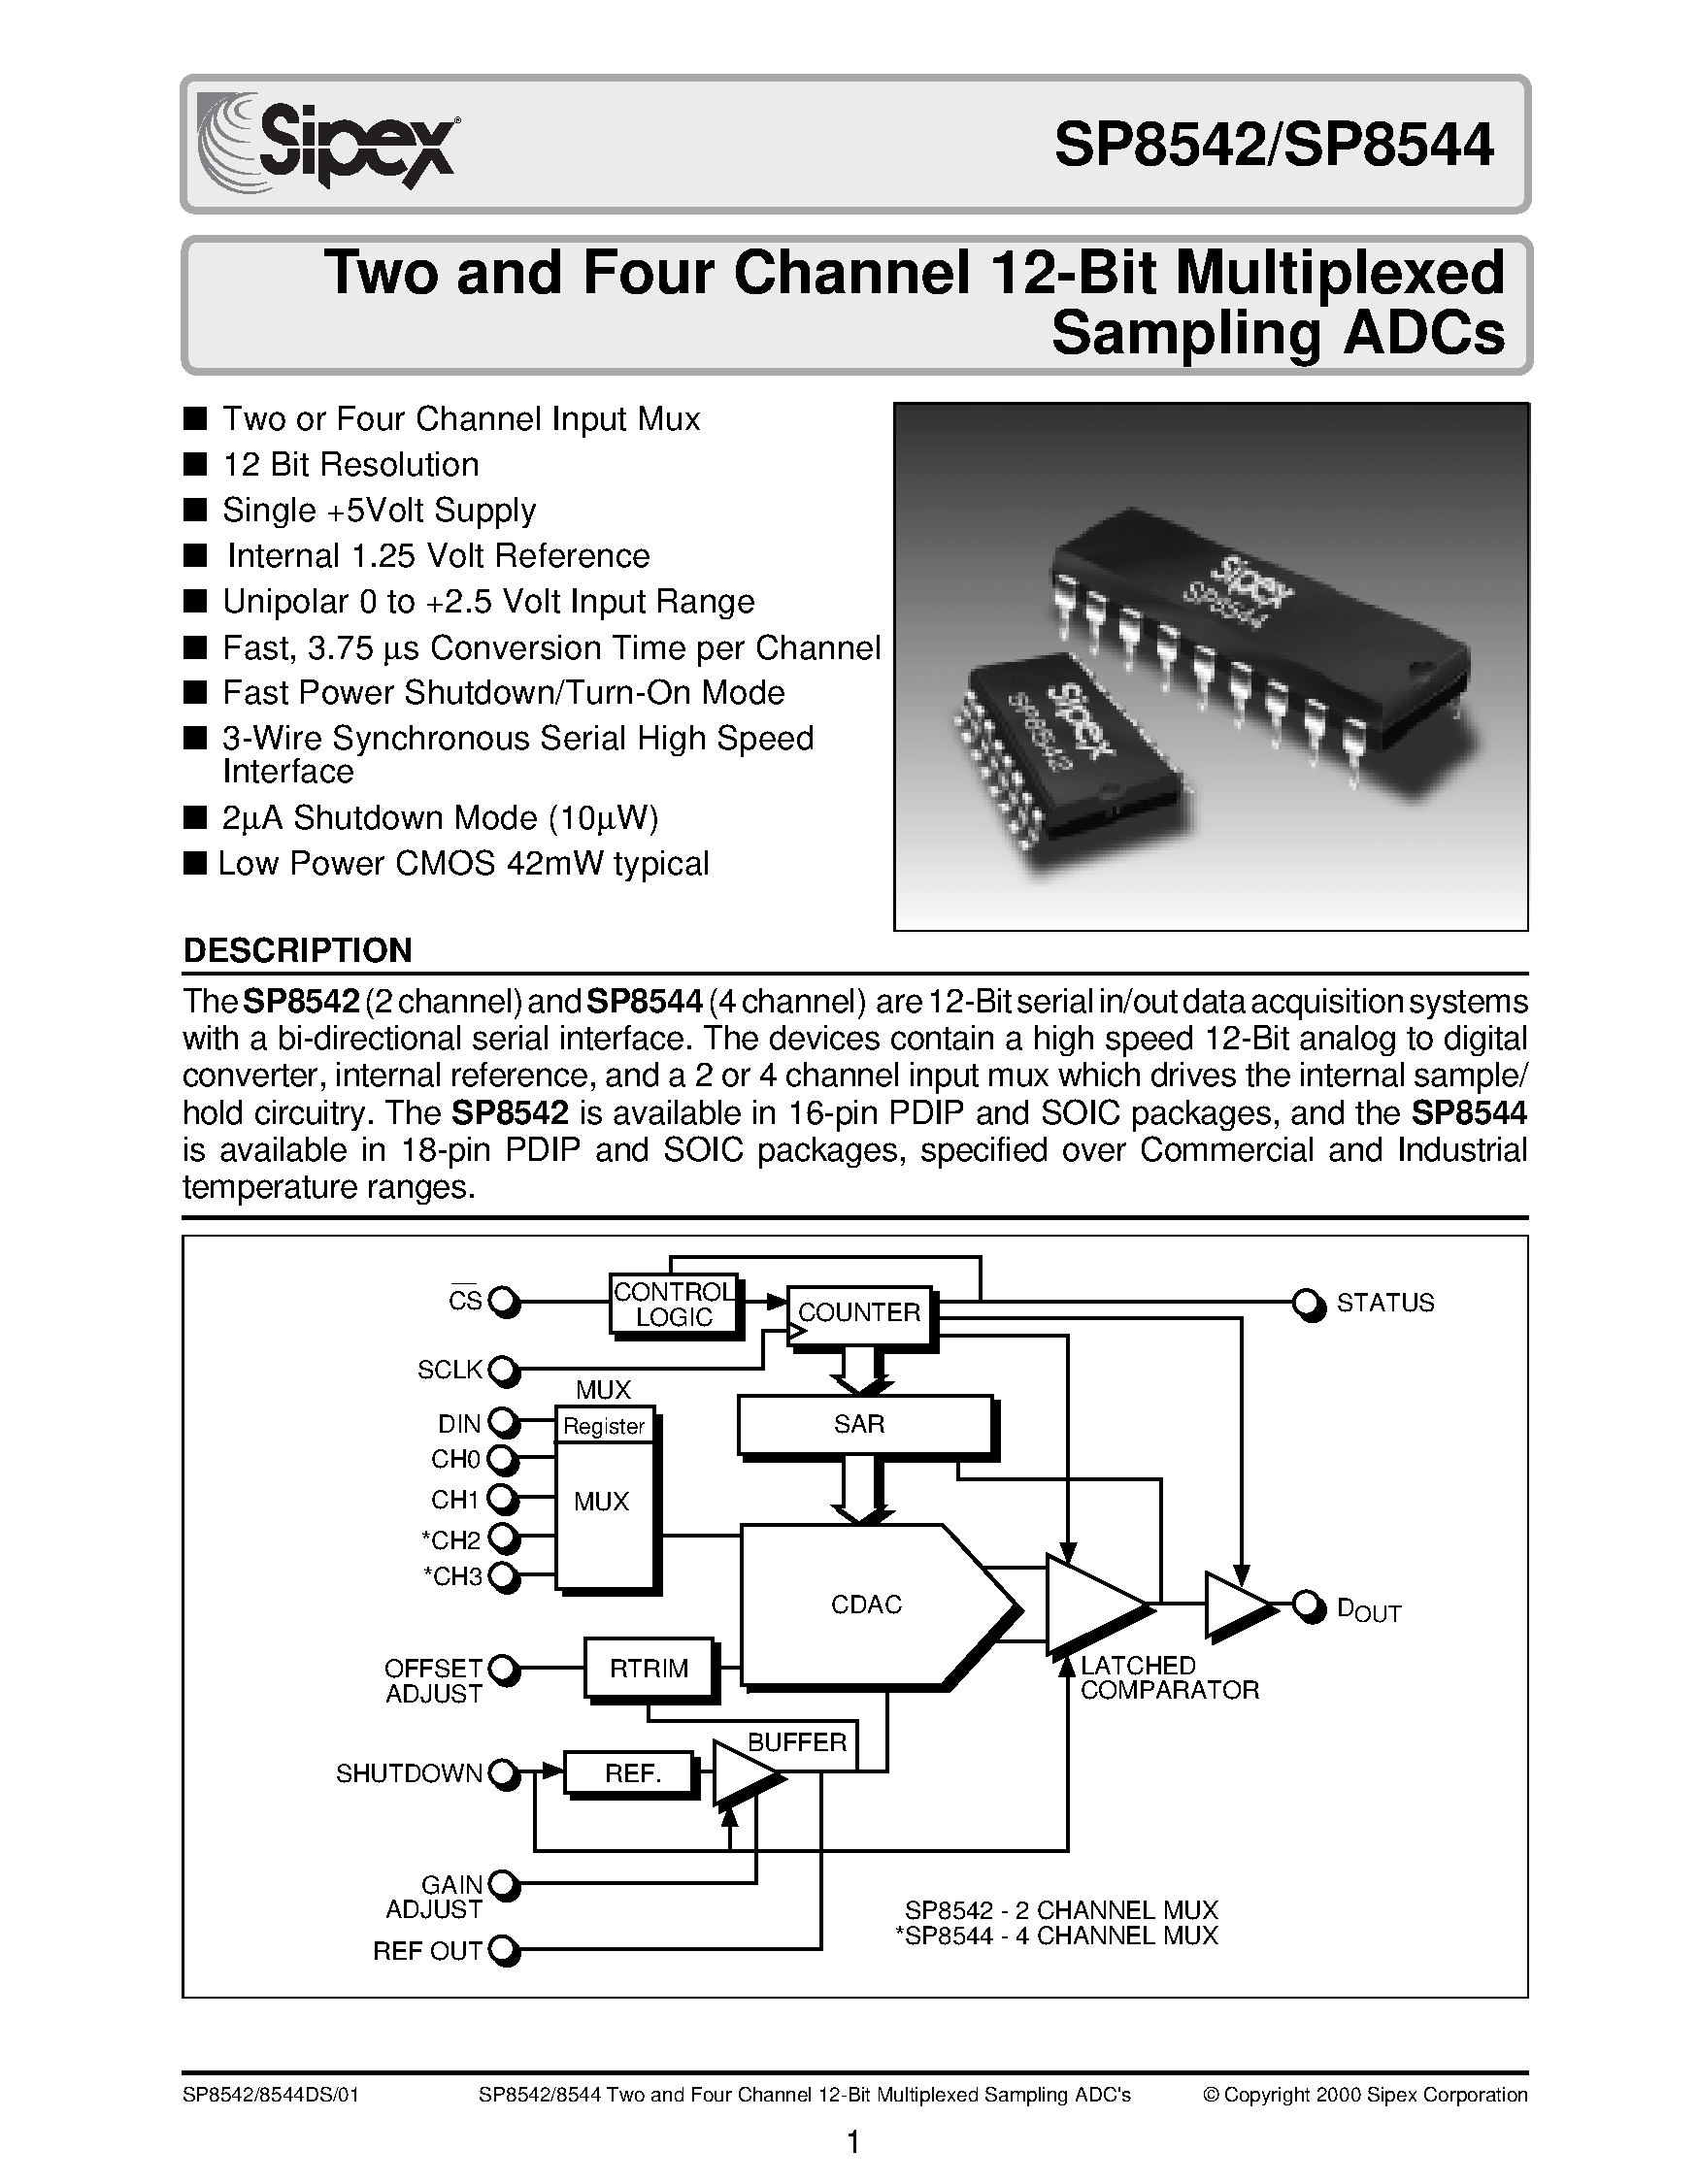 Datasheet SP8544KS - Two and Four Channel 12-Bit Multiplexed Sampling ADCs page 1